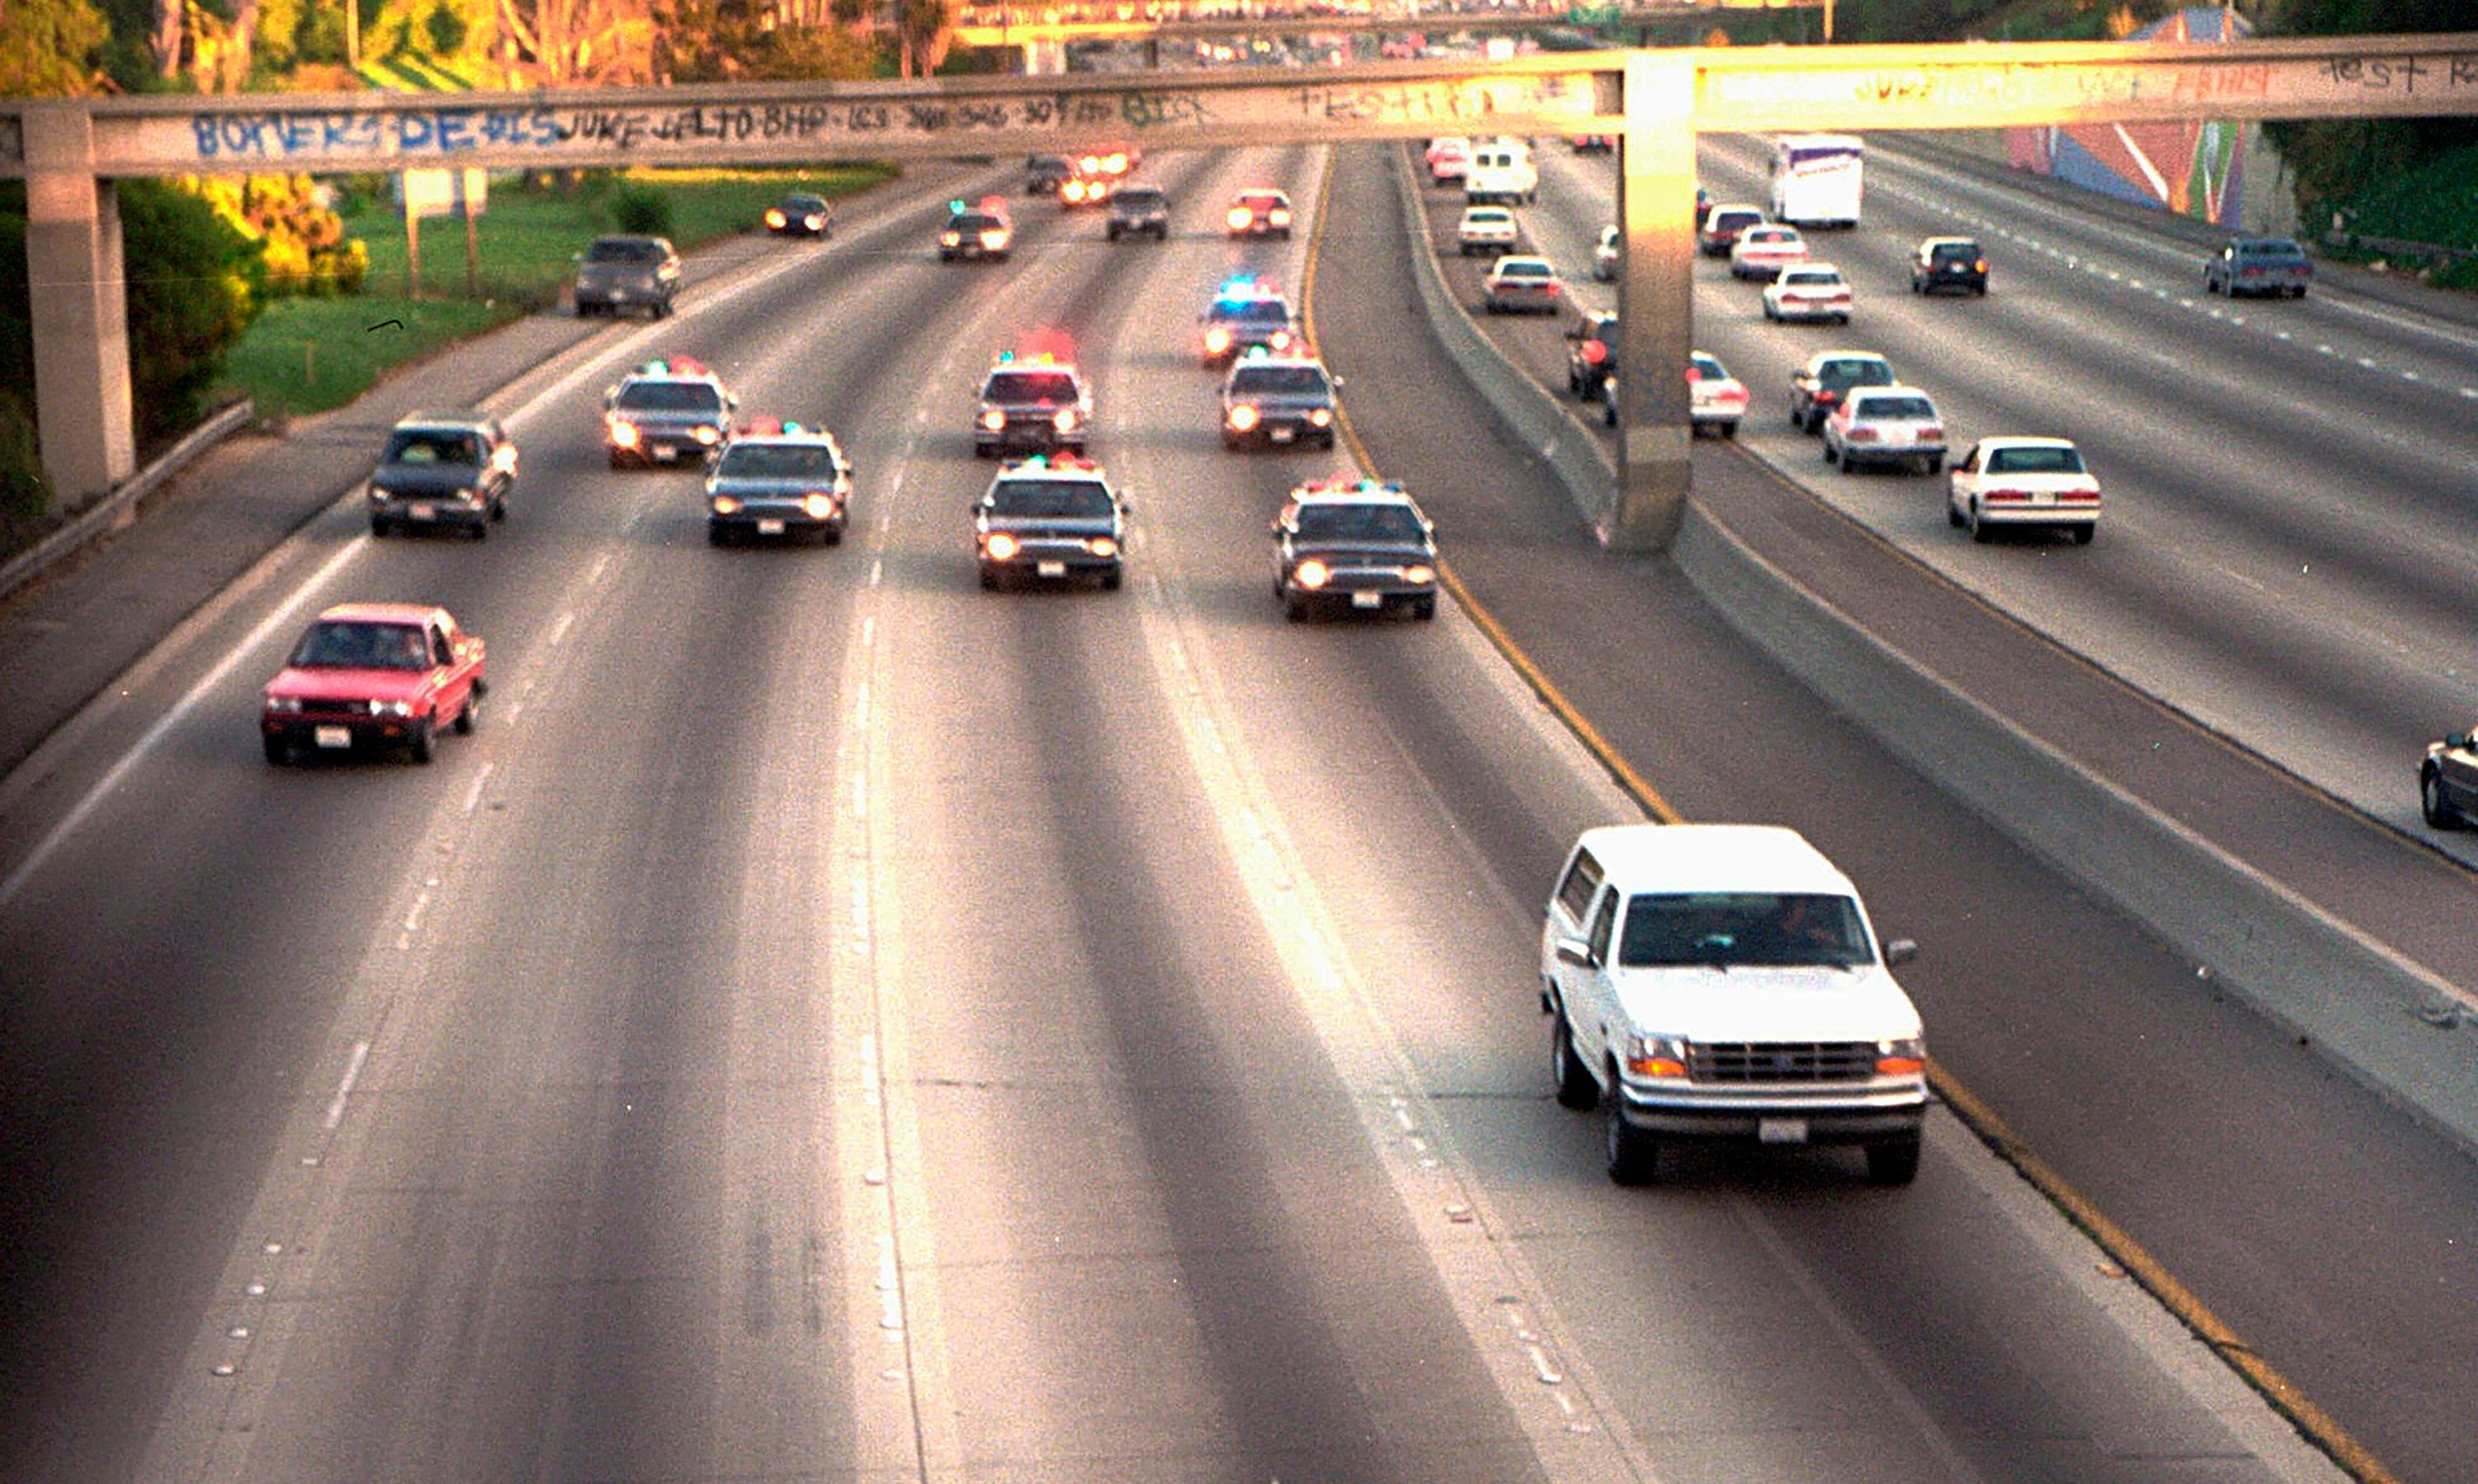 The Los Angeles car chase